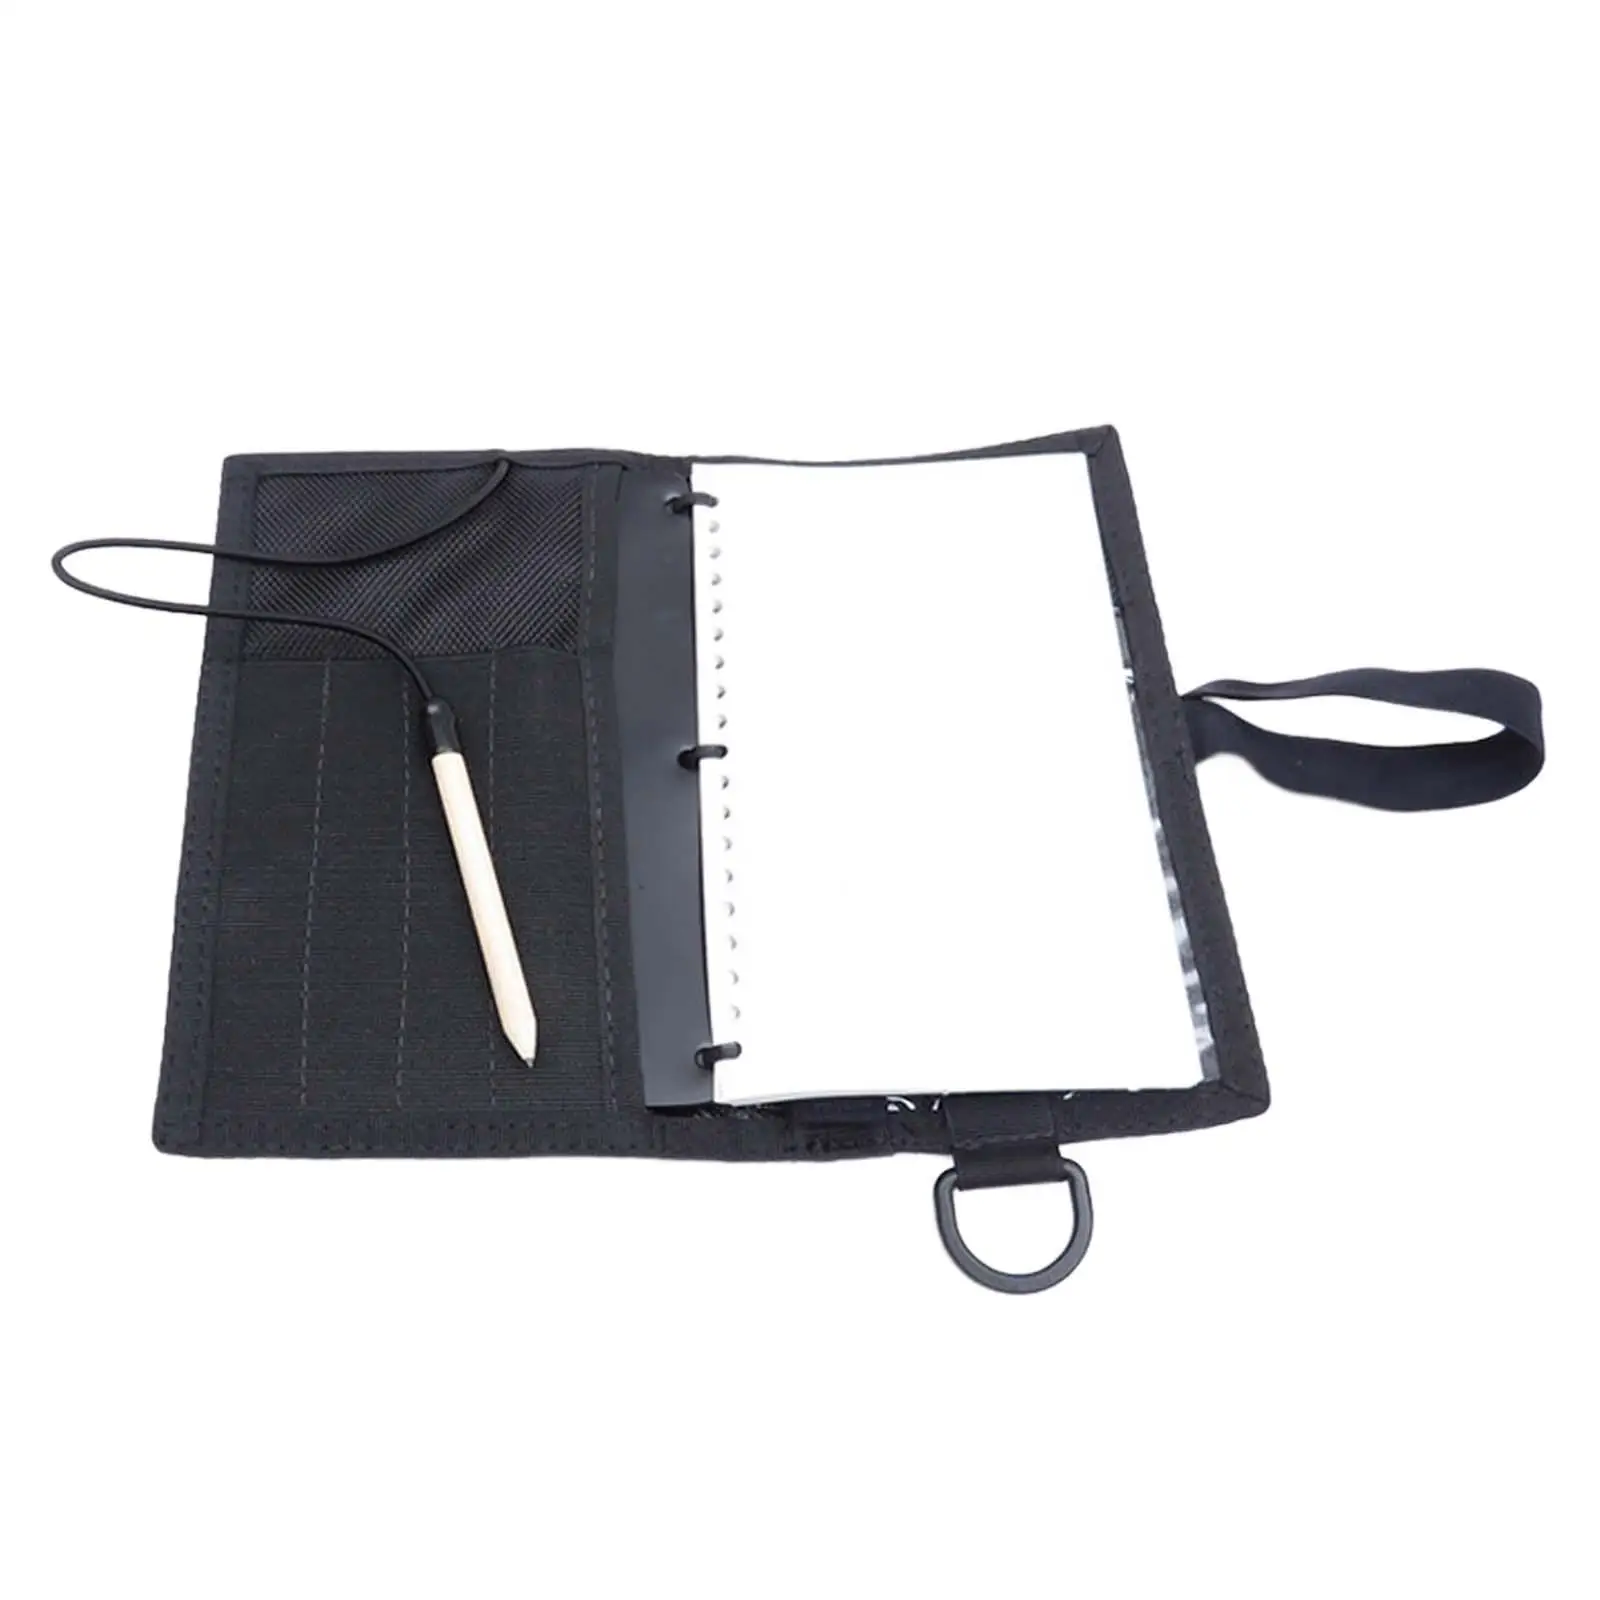 Diving Notebook Dive Note Board Waterproof Paper Underwater Writing Slate for Water Sports Freediving Swimming Diving